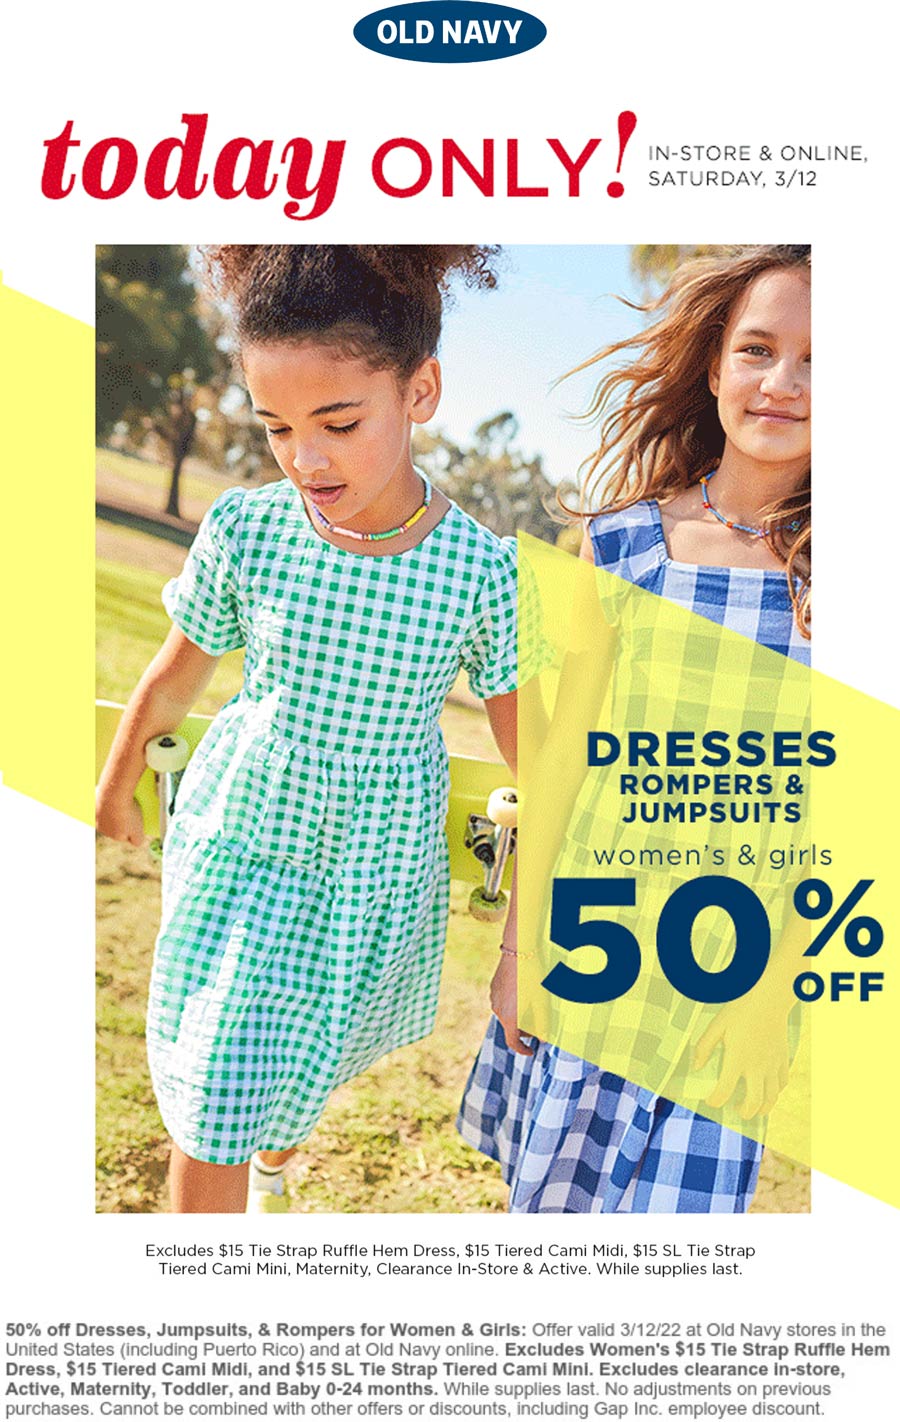 Old Navy stores Coupon  Womens & girls dresses are 50% off today at Old Navy, also online #oldnavy 